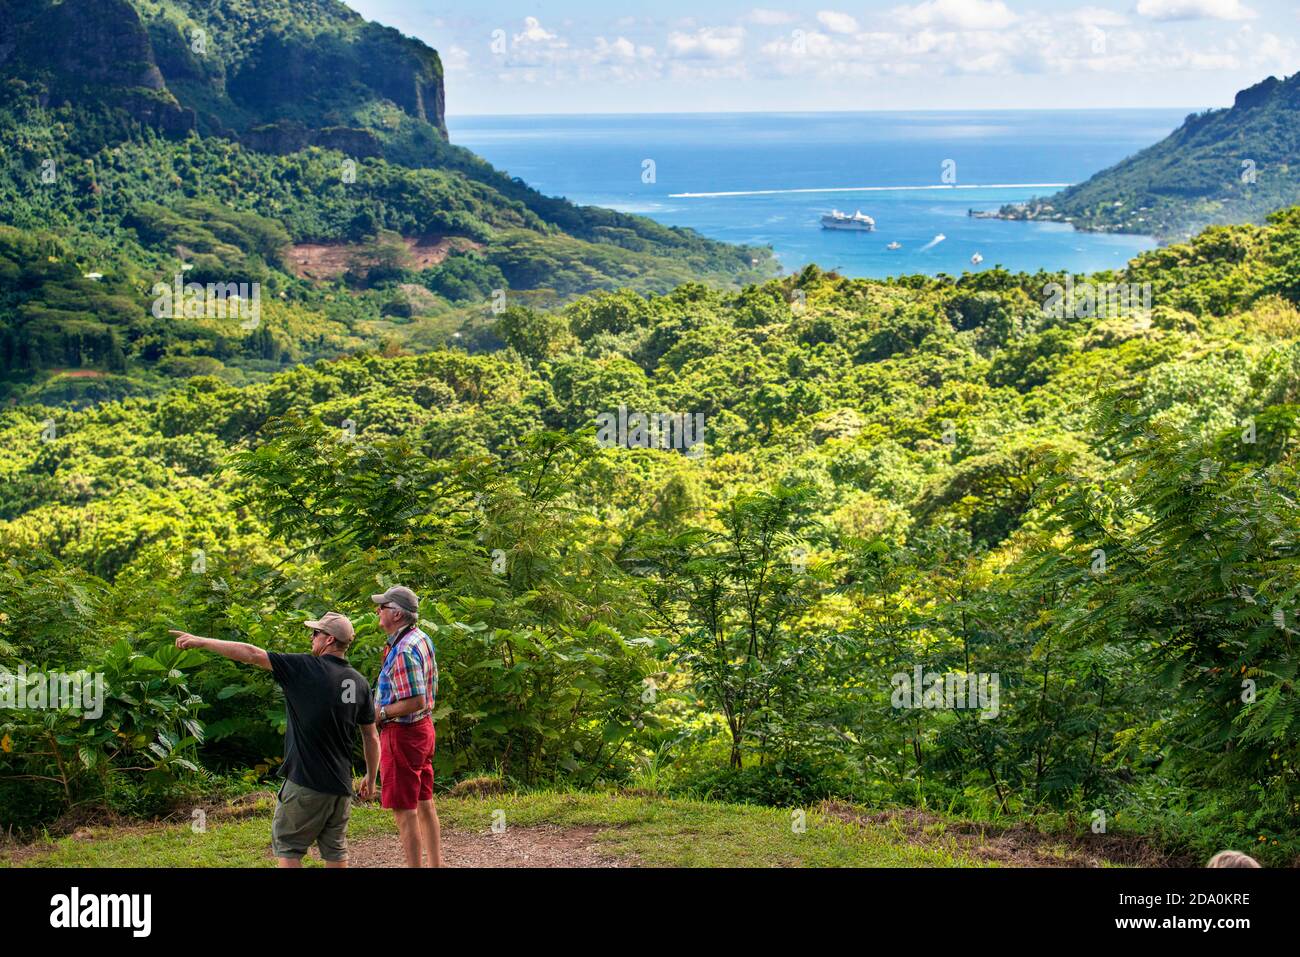 Nature photography workshop in front of wolf enclosure to photograph wolves, Moorea, French Polynesia, Society Islands, South Pacific. Stock Photo